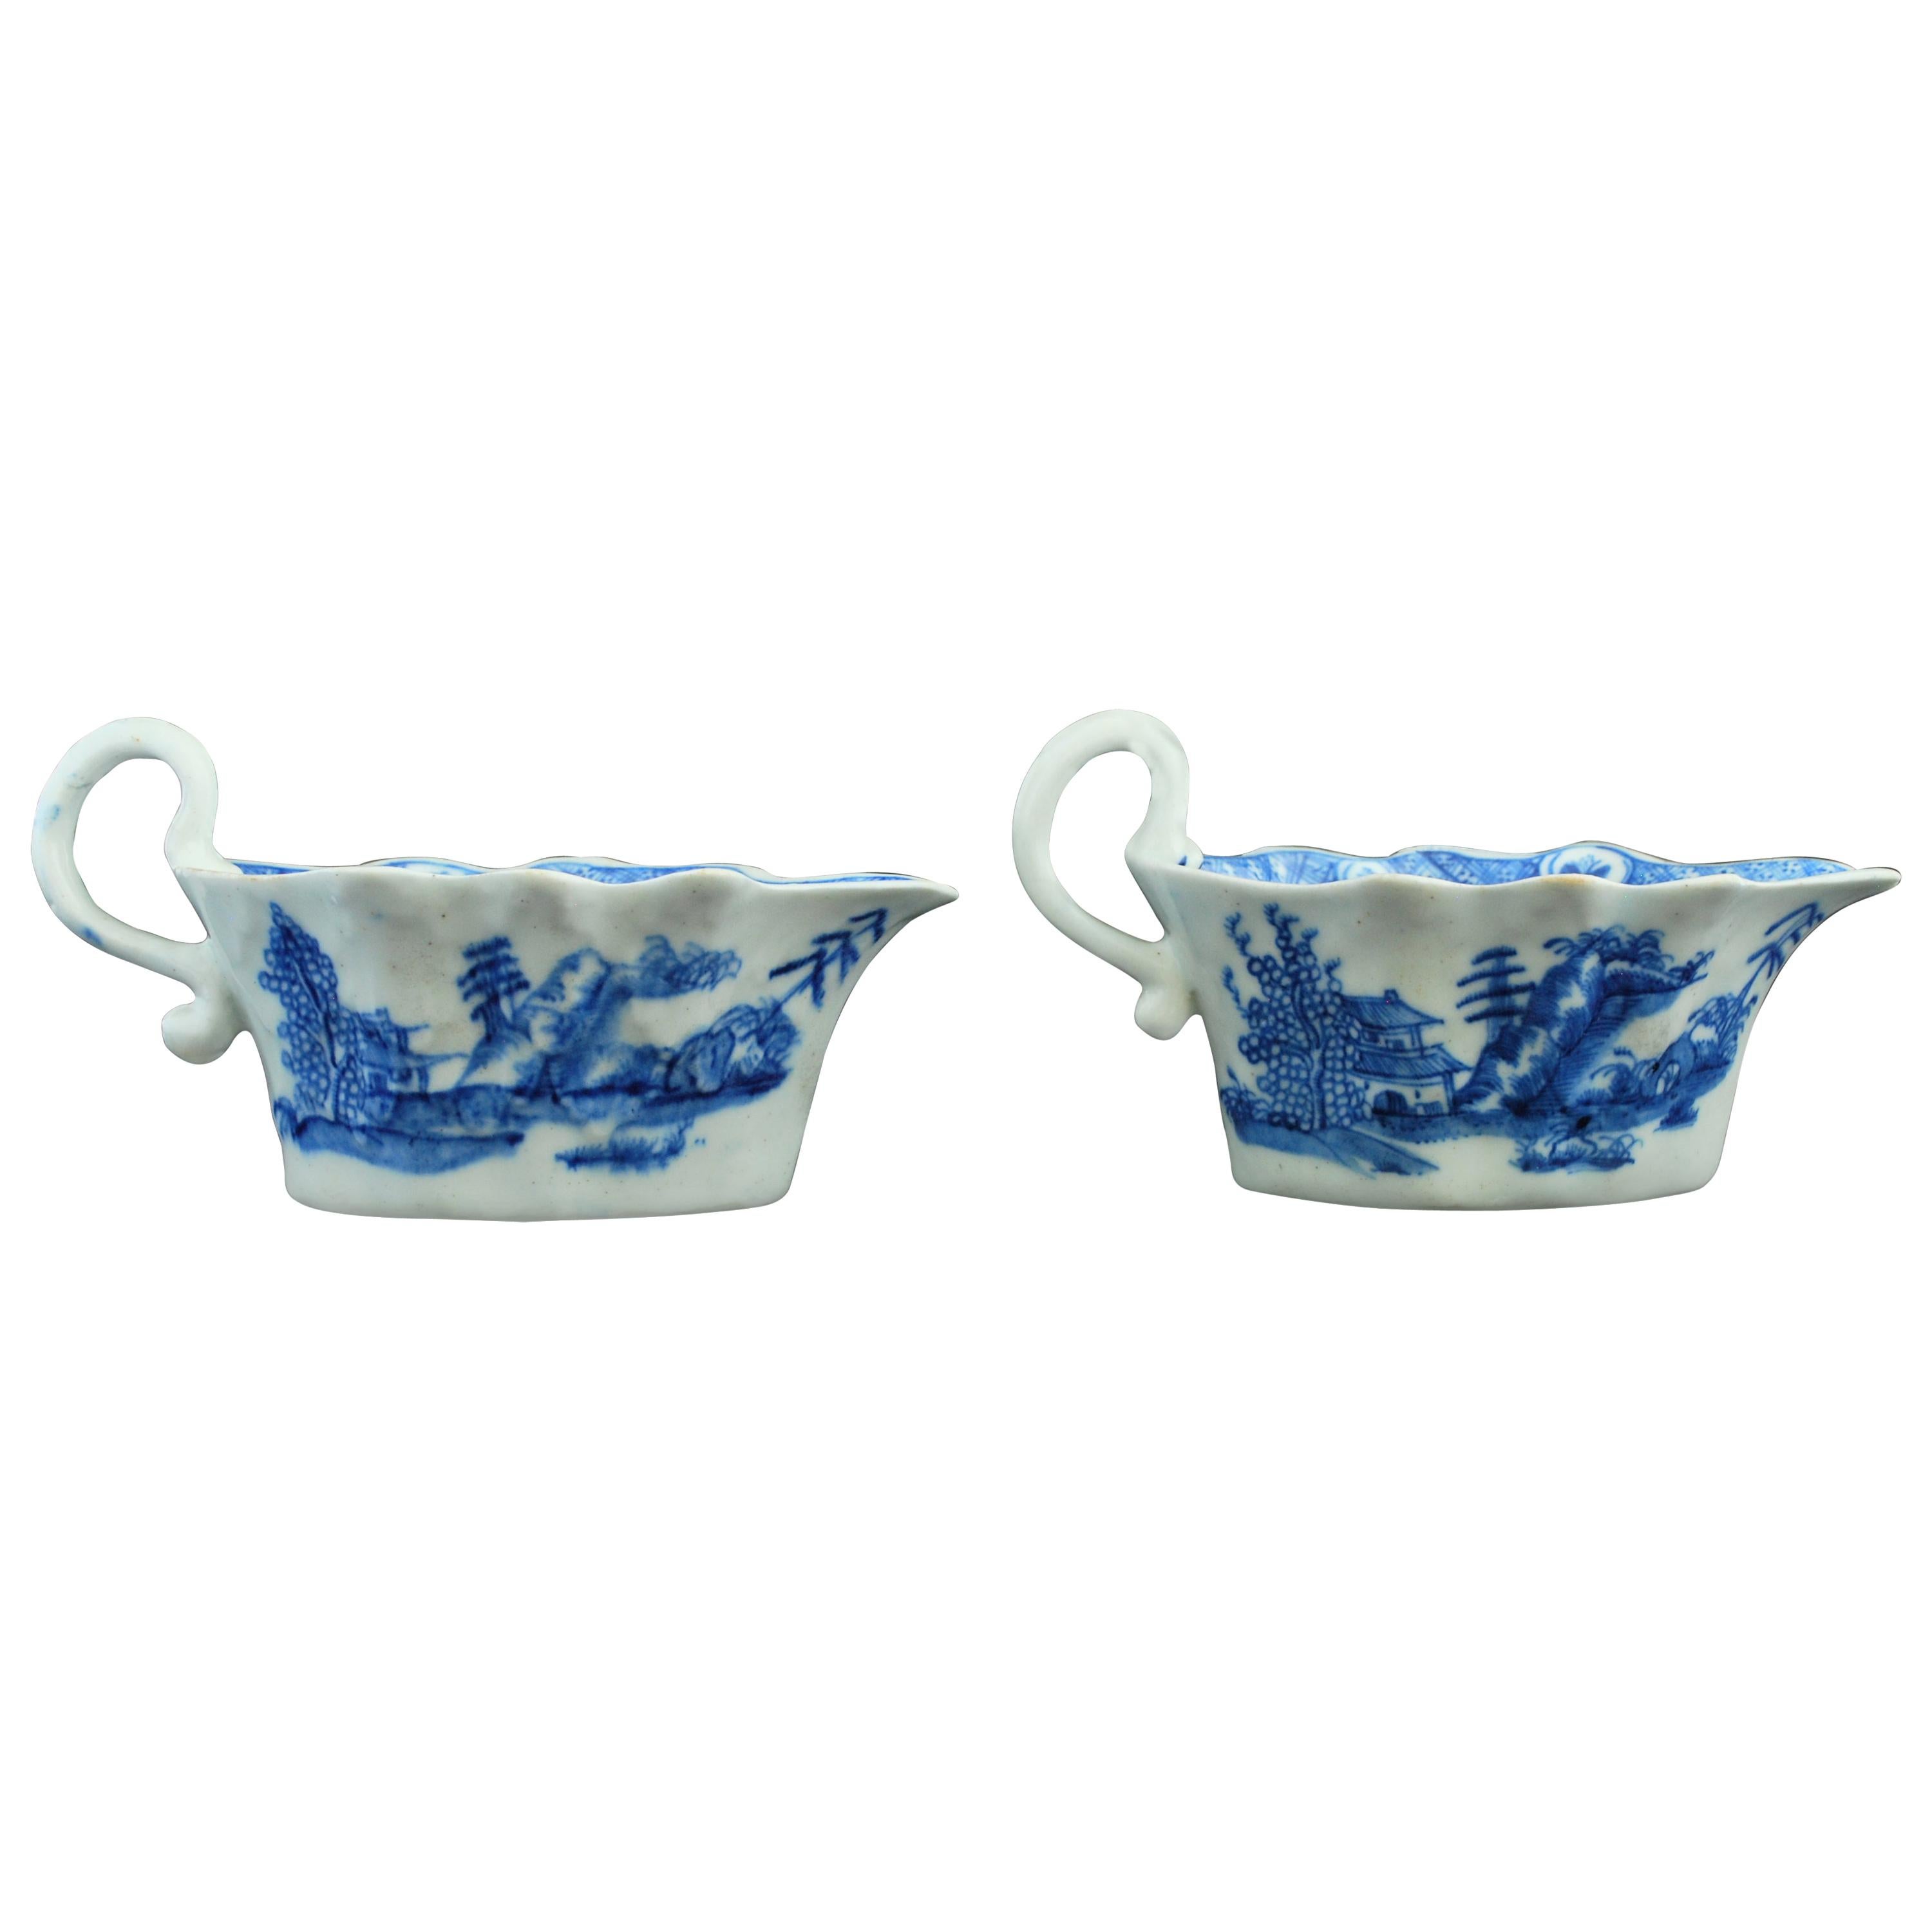 Pair of Sauce Boats, Bow Porcelain Factory, circa 1753